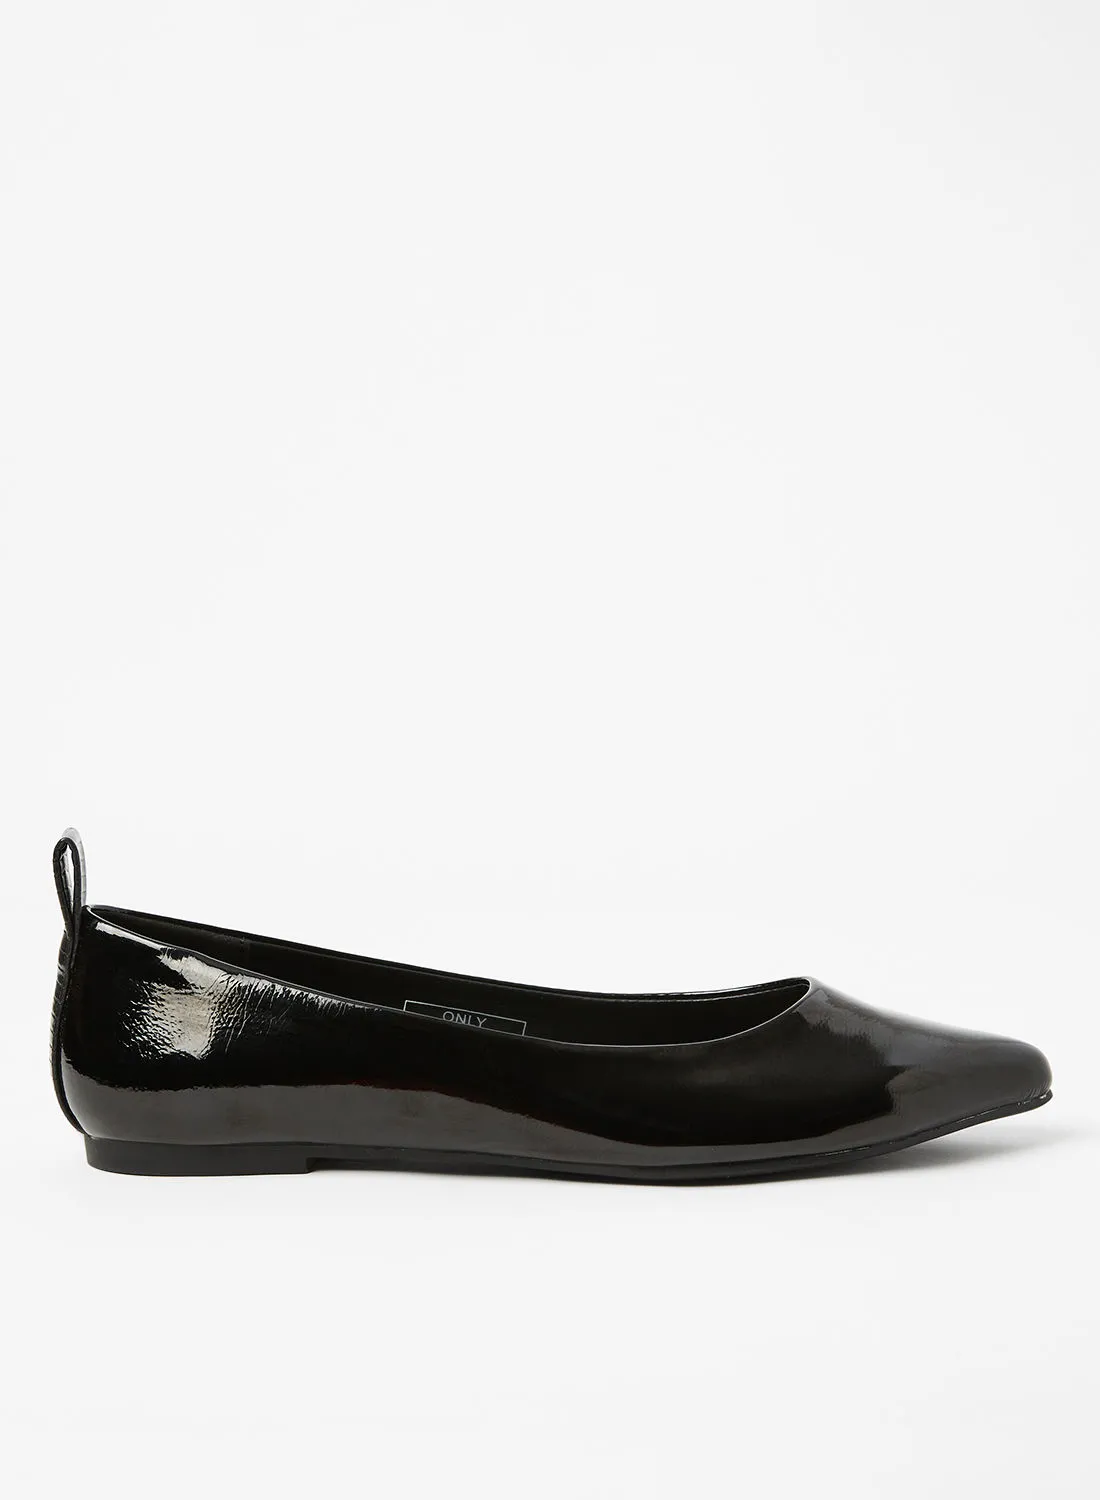 ONLY Anas Pointed Ballerinas Black